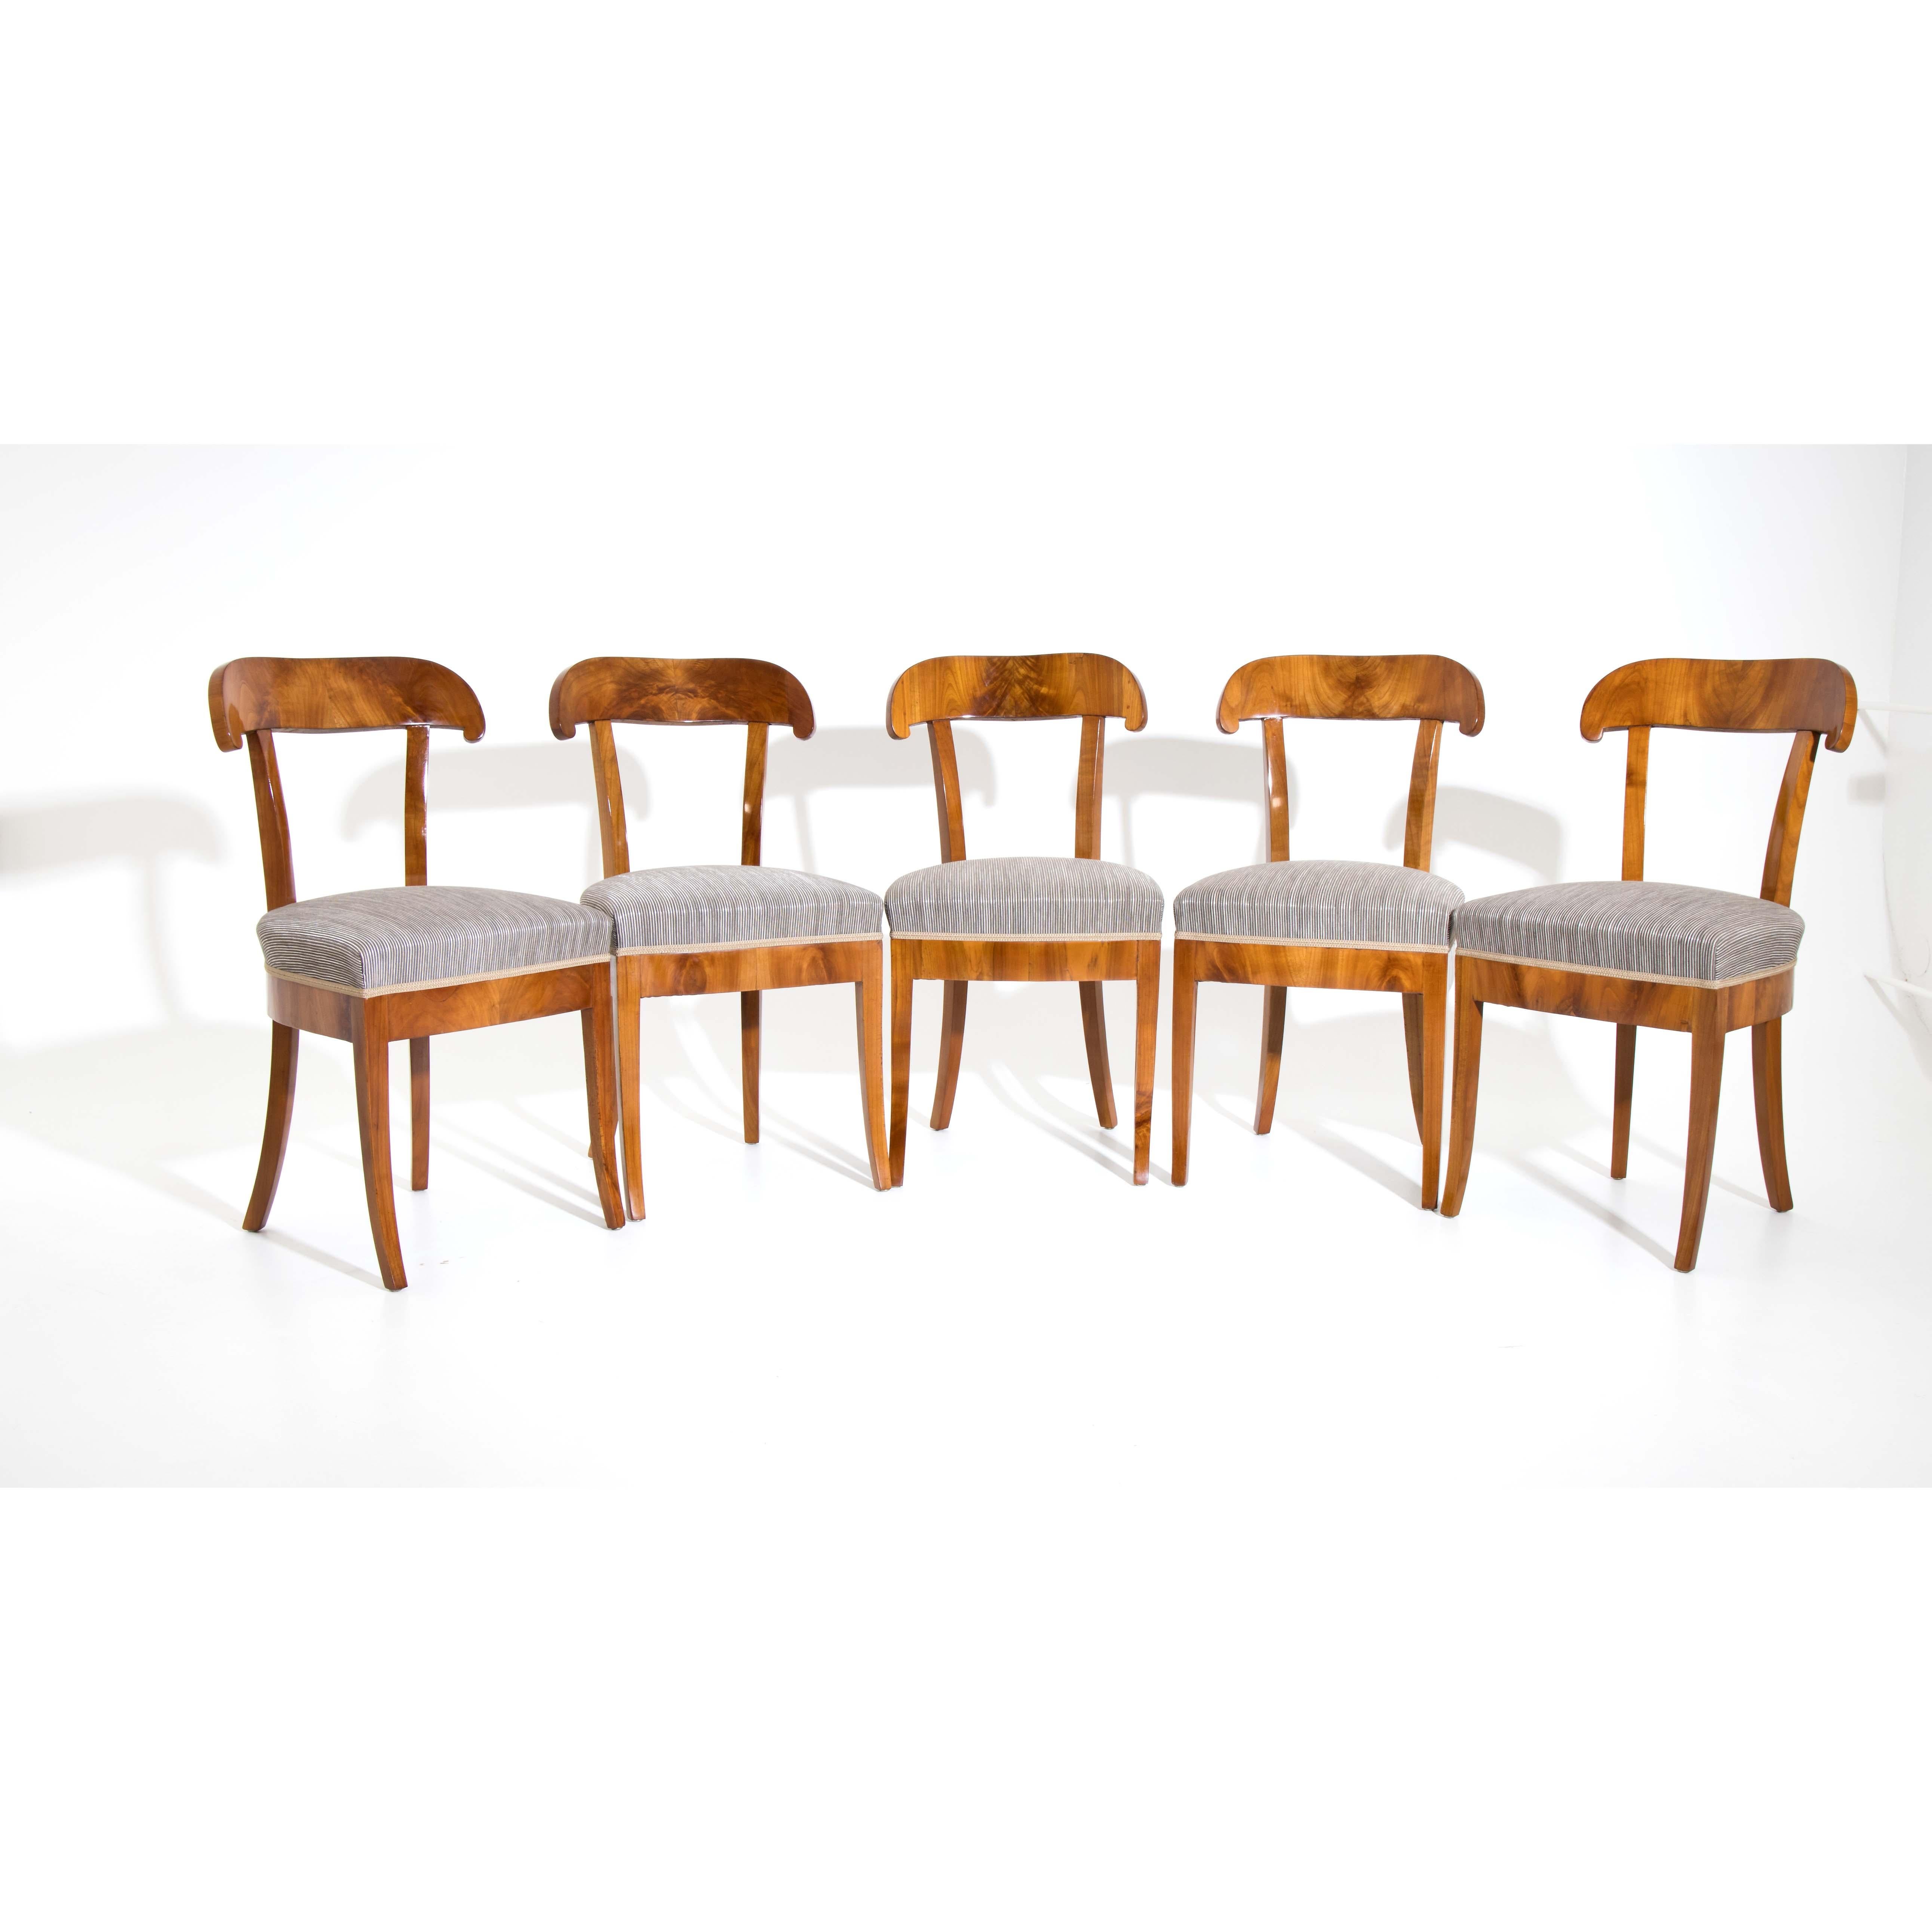 Set of five Biedermeier shovel chairs with slightly flared legs and straight rails. The chairs are veneered in cherry. They are newly covered with a grey striped fabric and hand-polished.